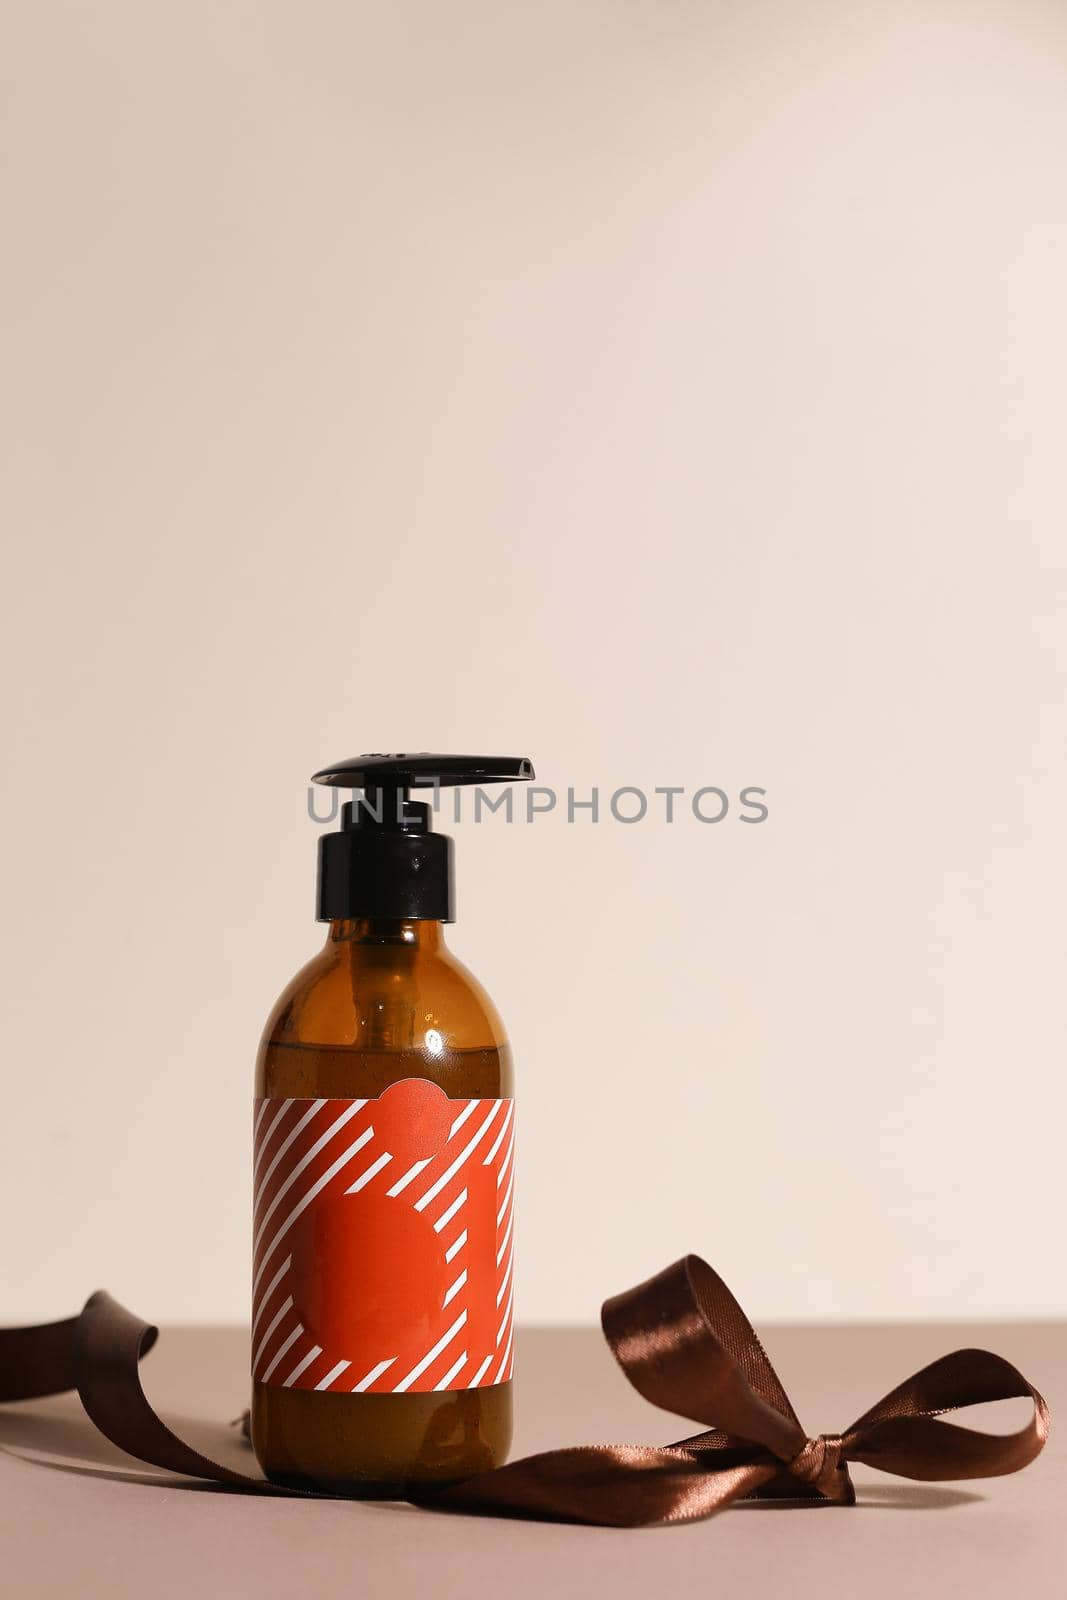 Beauty natural skincare products development concept. Dermatologist cosmetic skincare bottle with pump dispenser and organic ingredient on neutral background with copy pace text. Ribbon for present